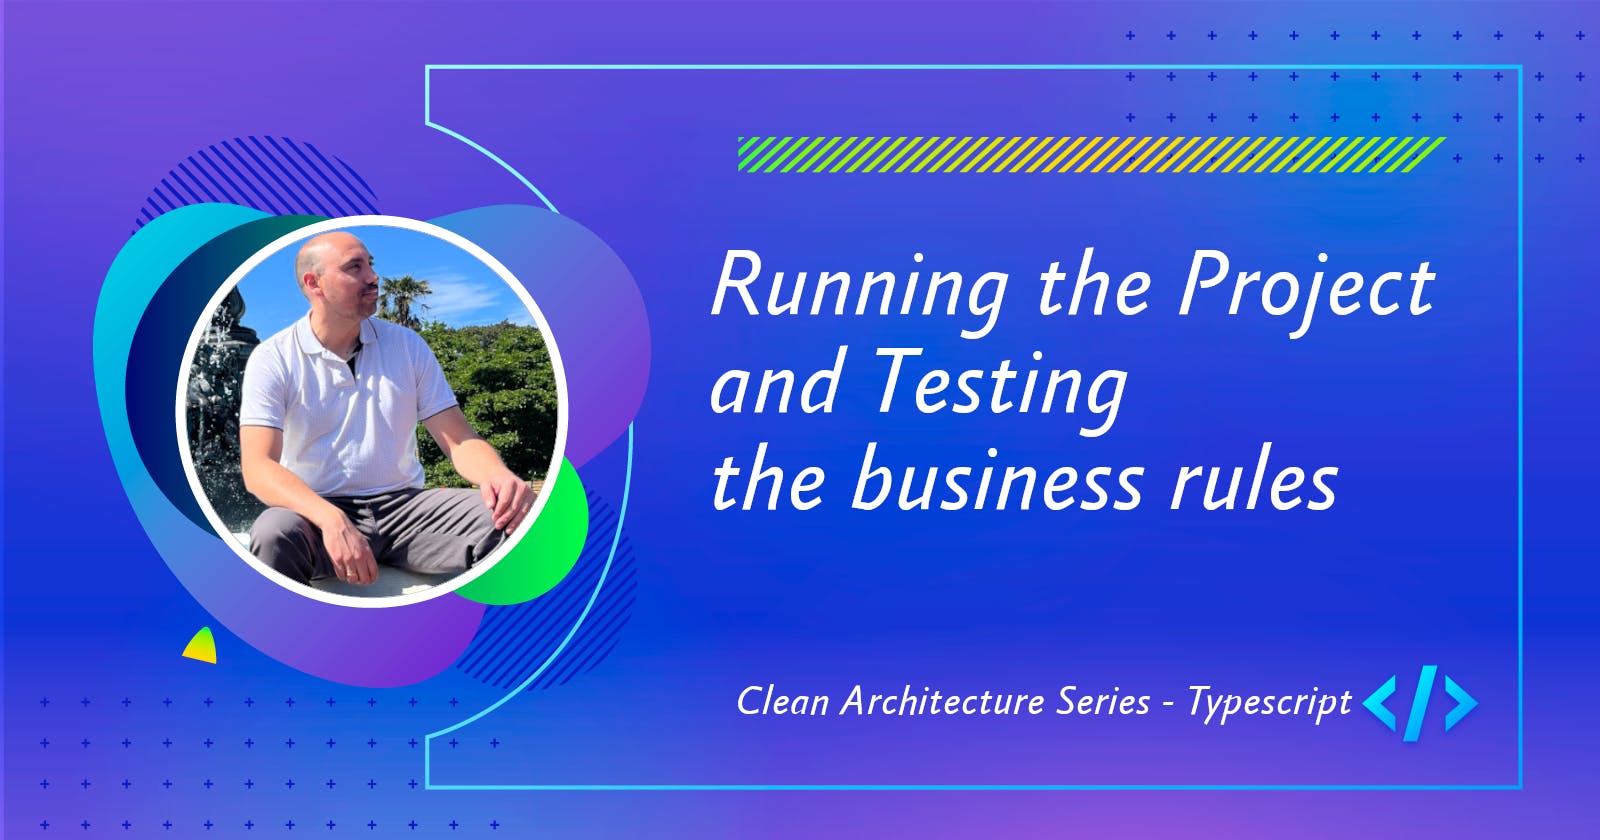 Running the project and testing the business rules